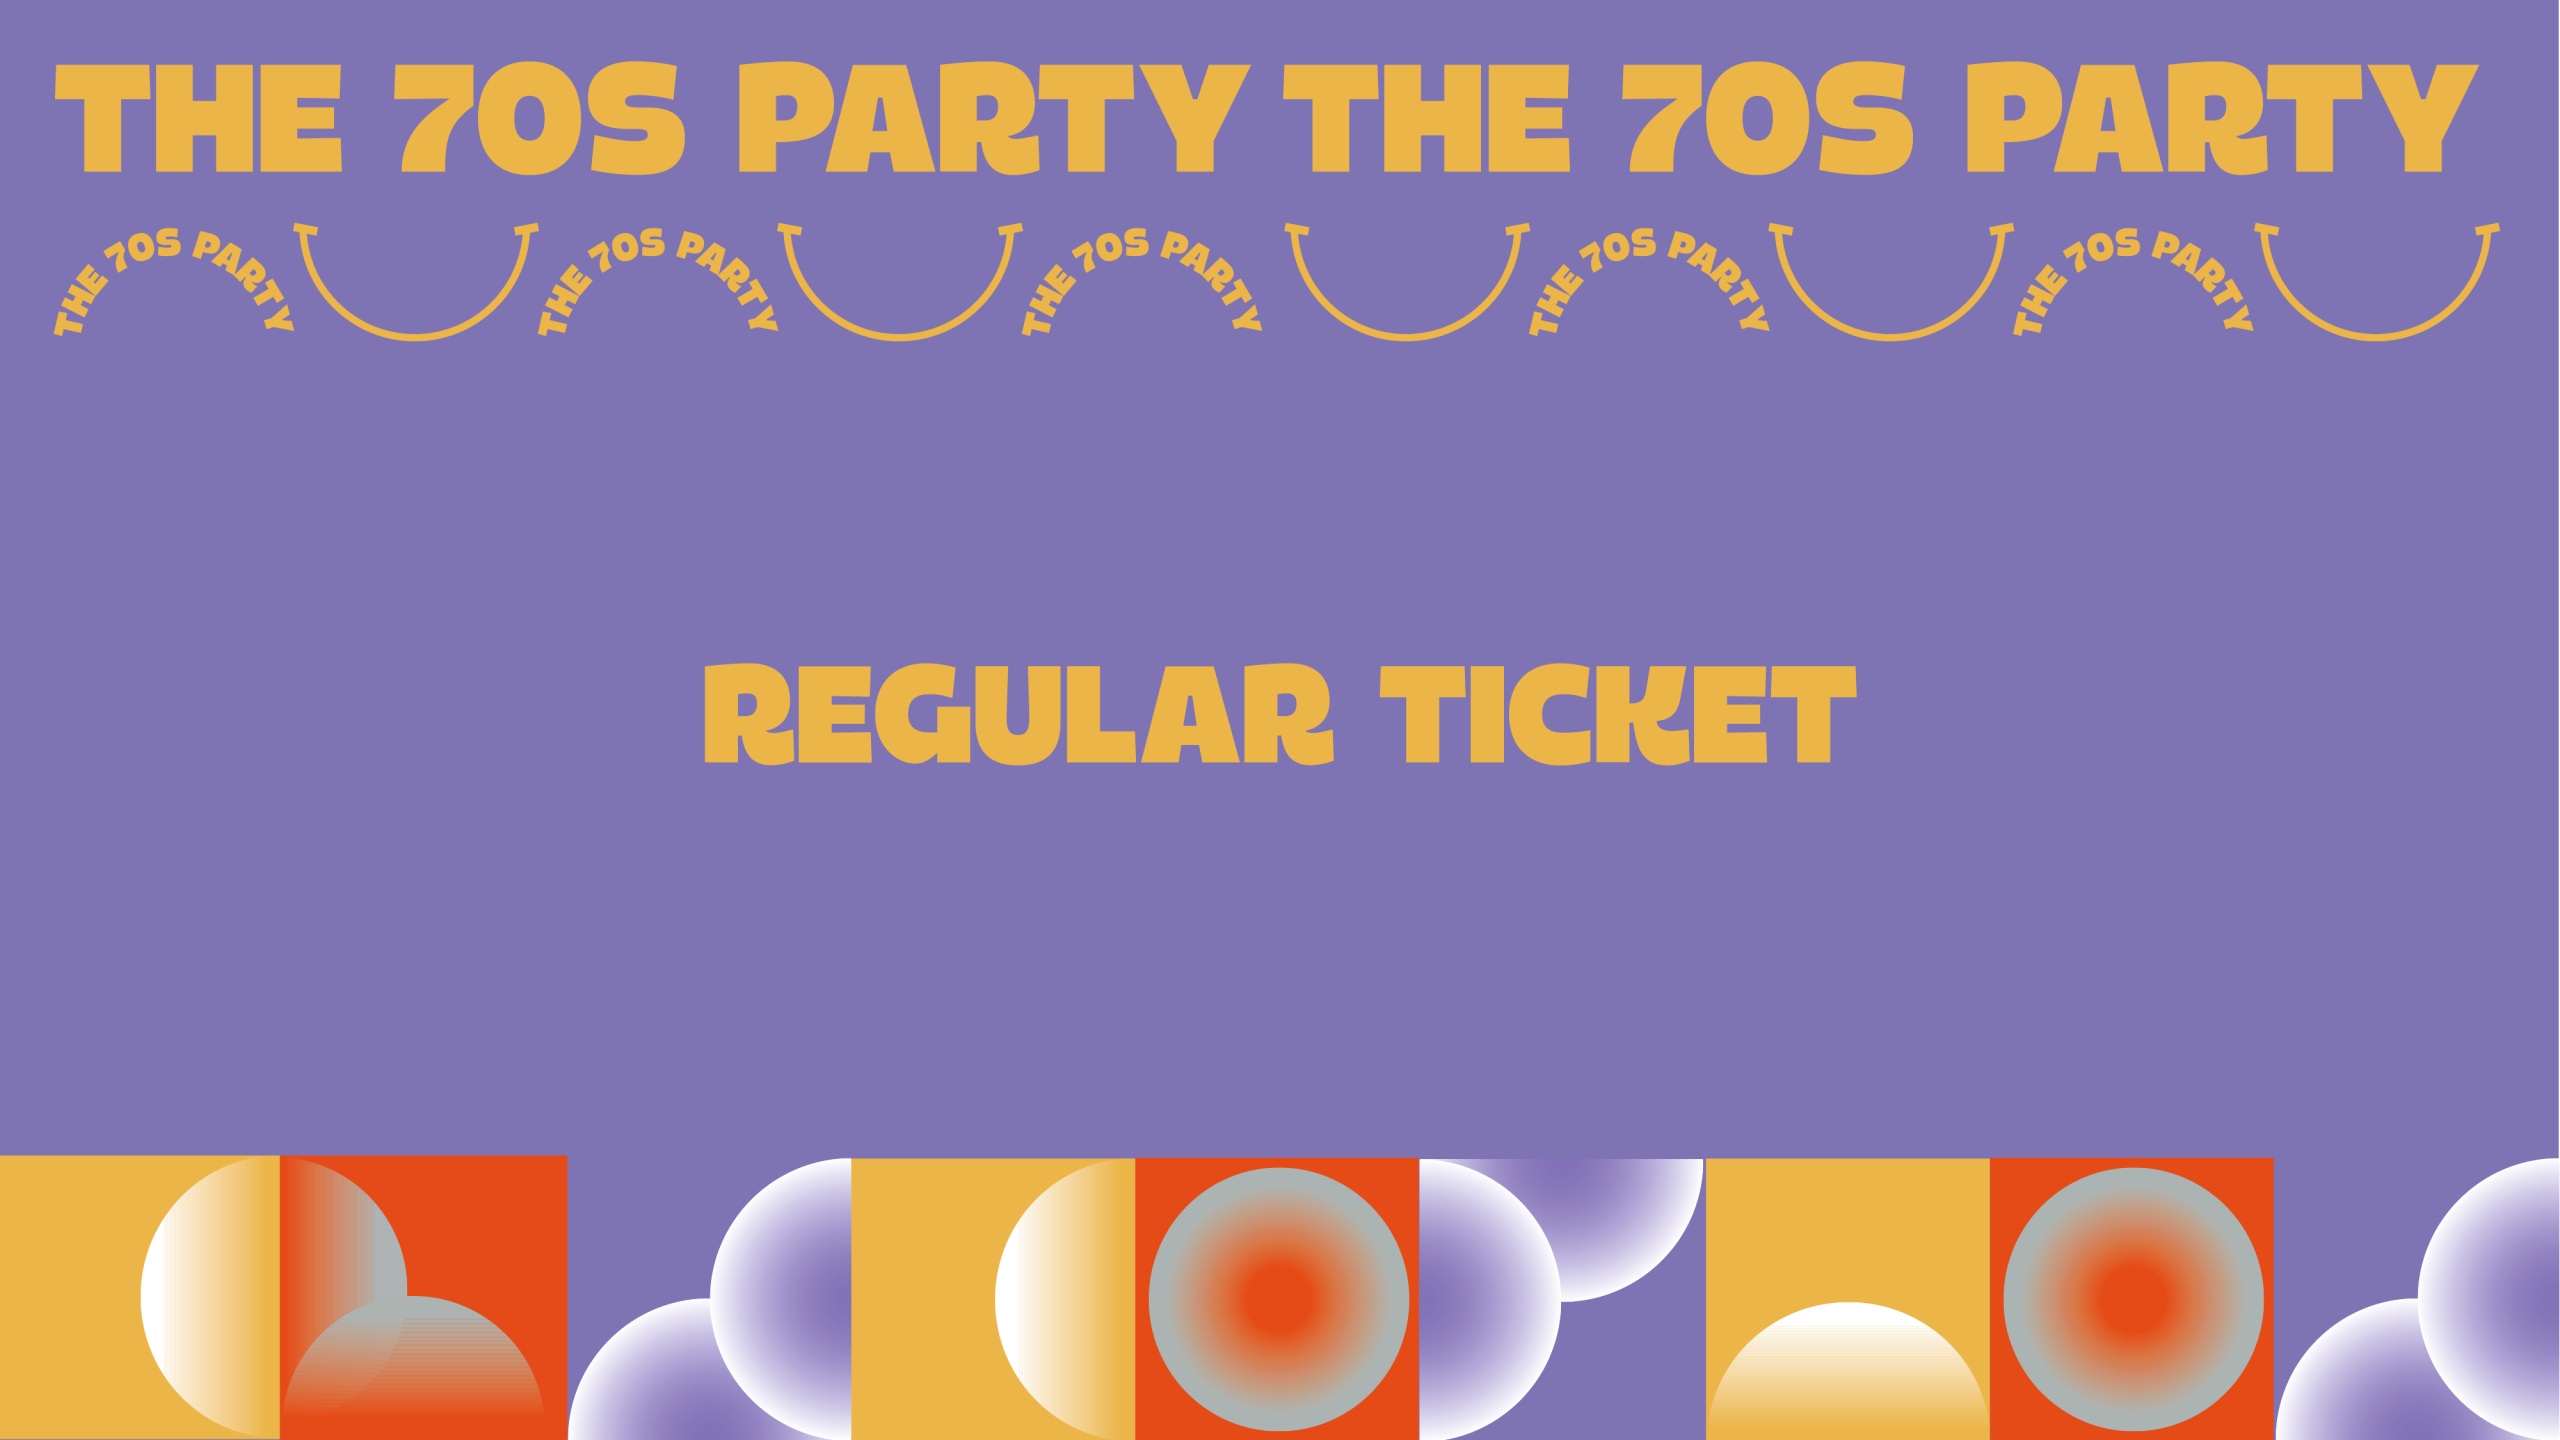 The 70s Party — Tickets — Regular